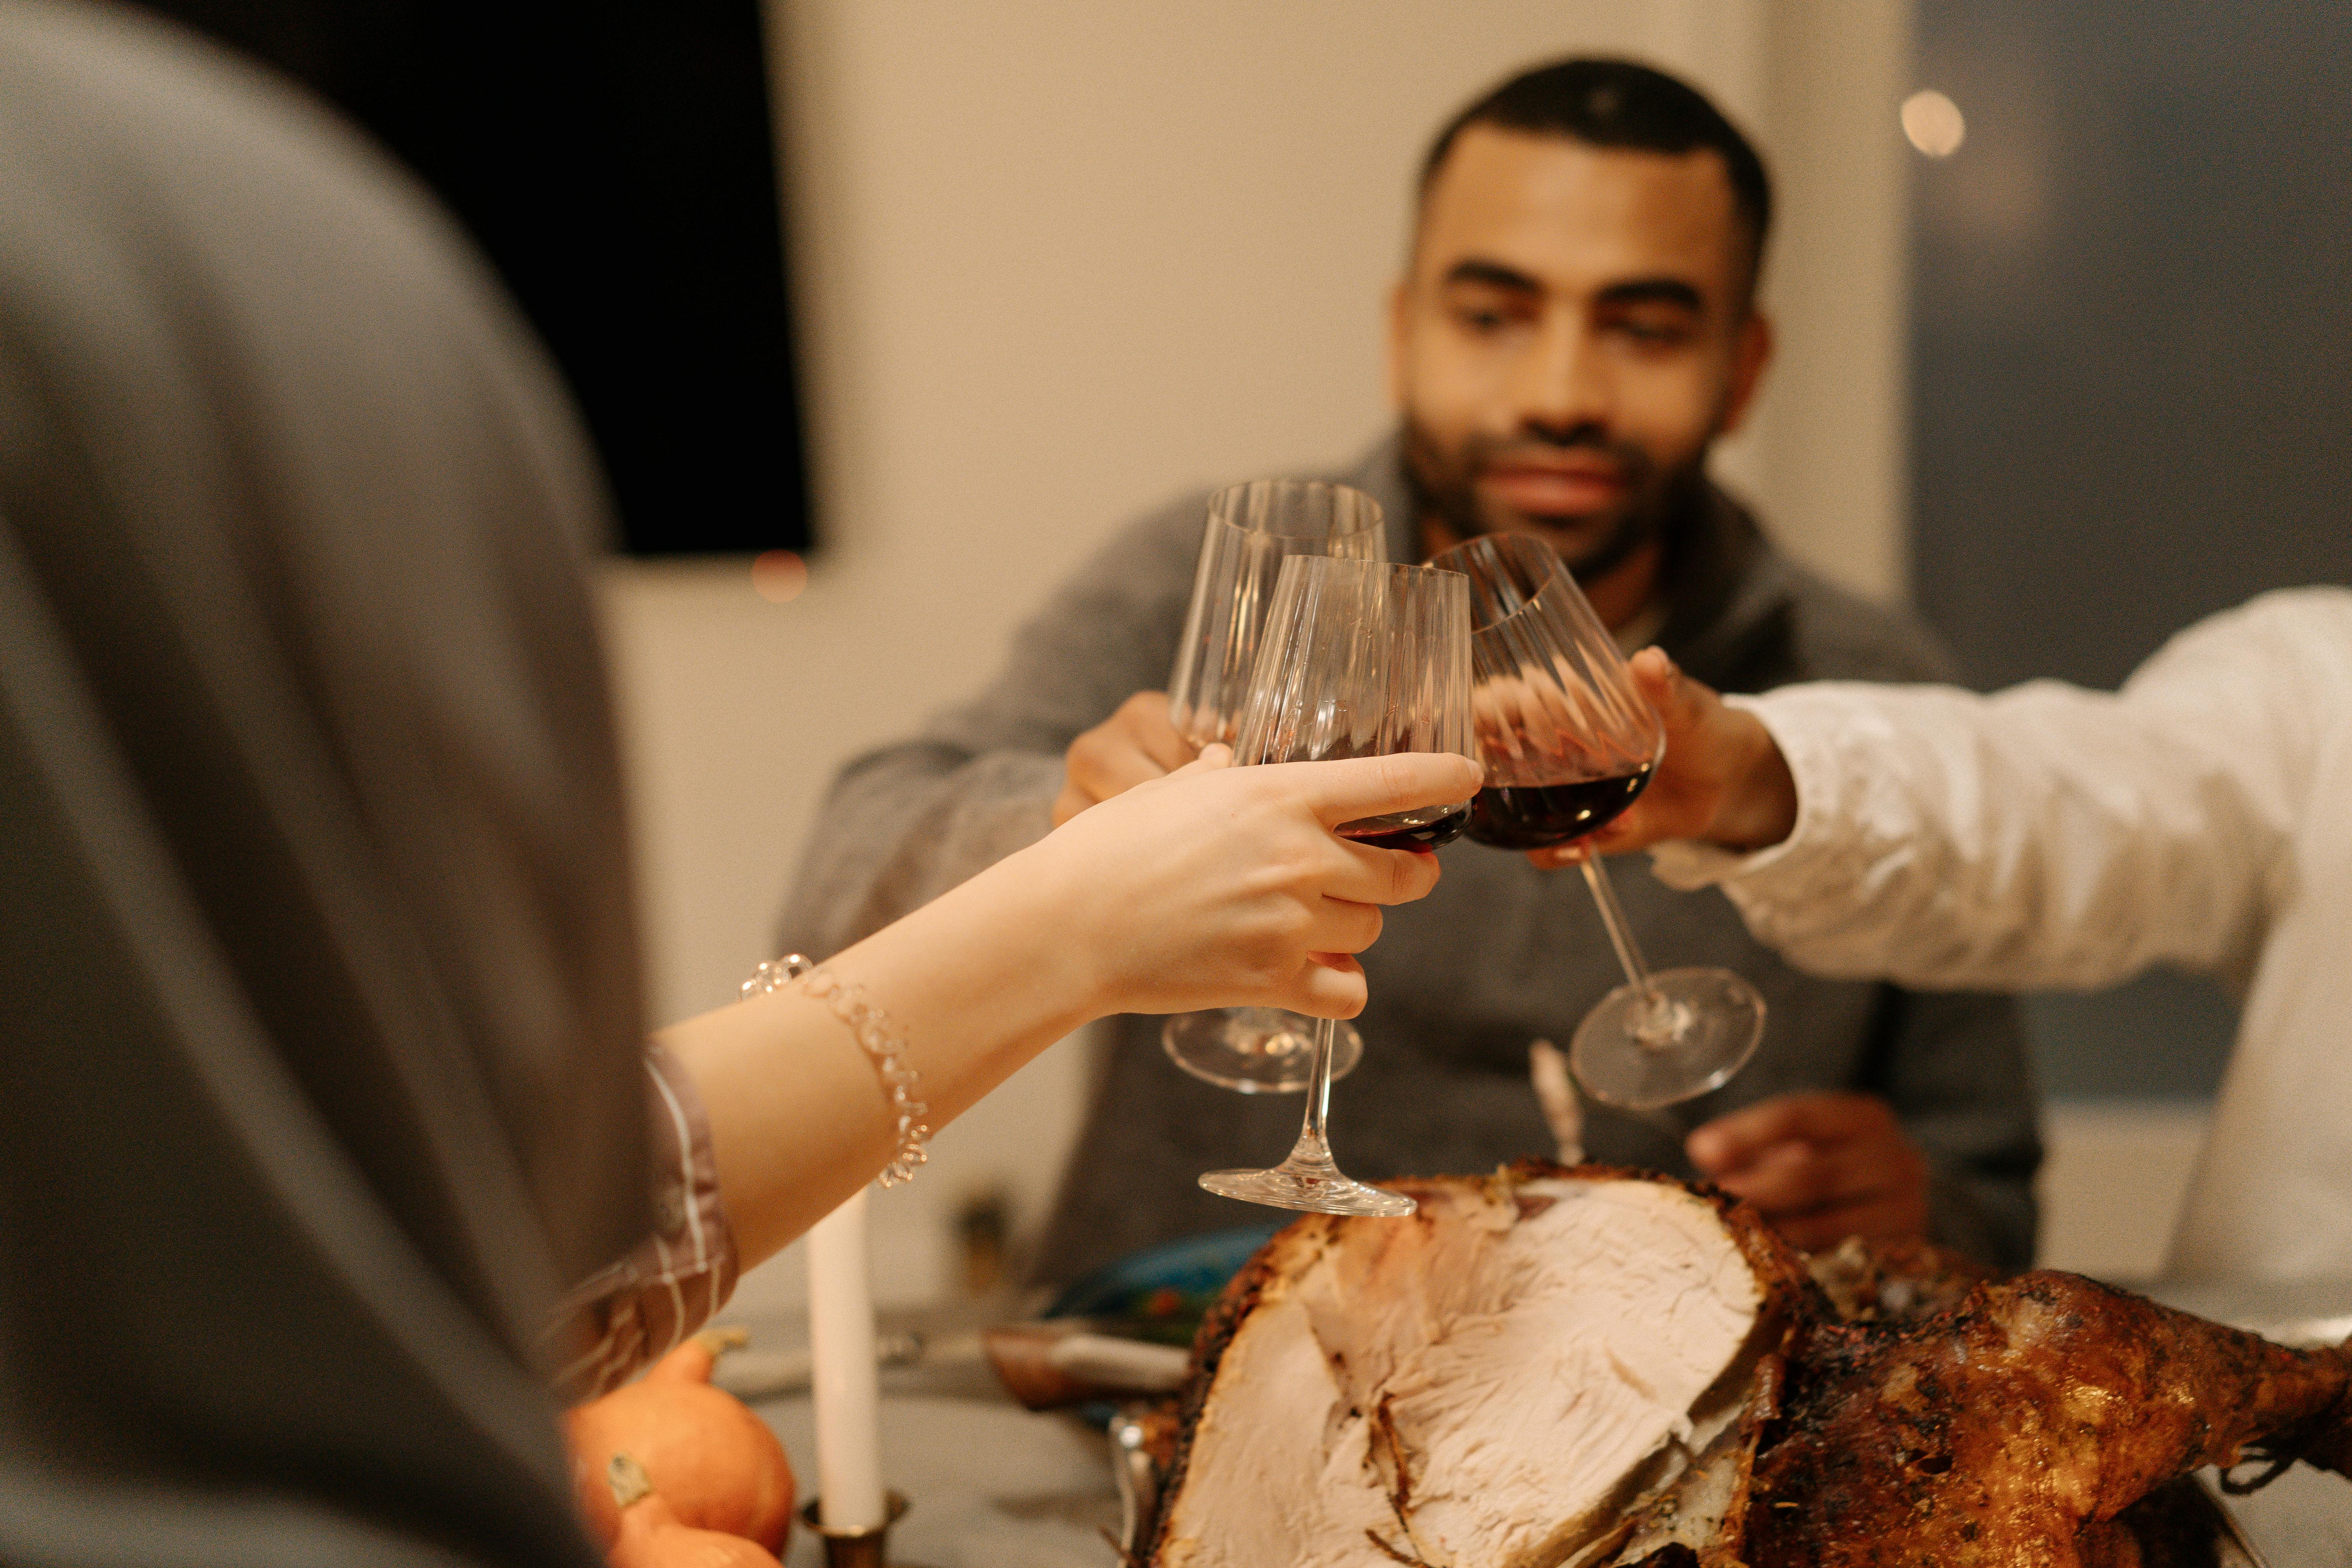 Man toasts at a party | Source: Pexels